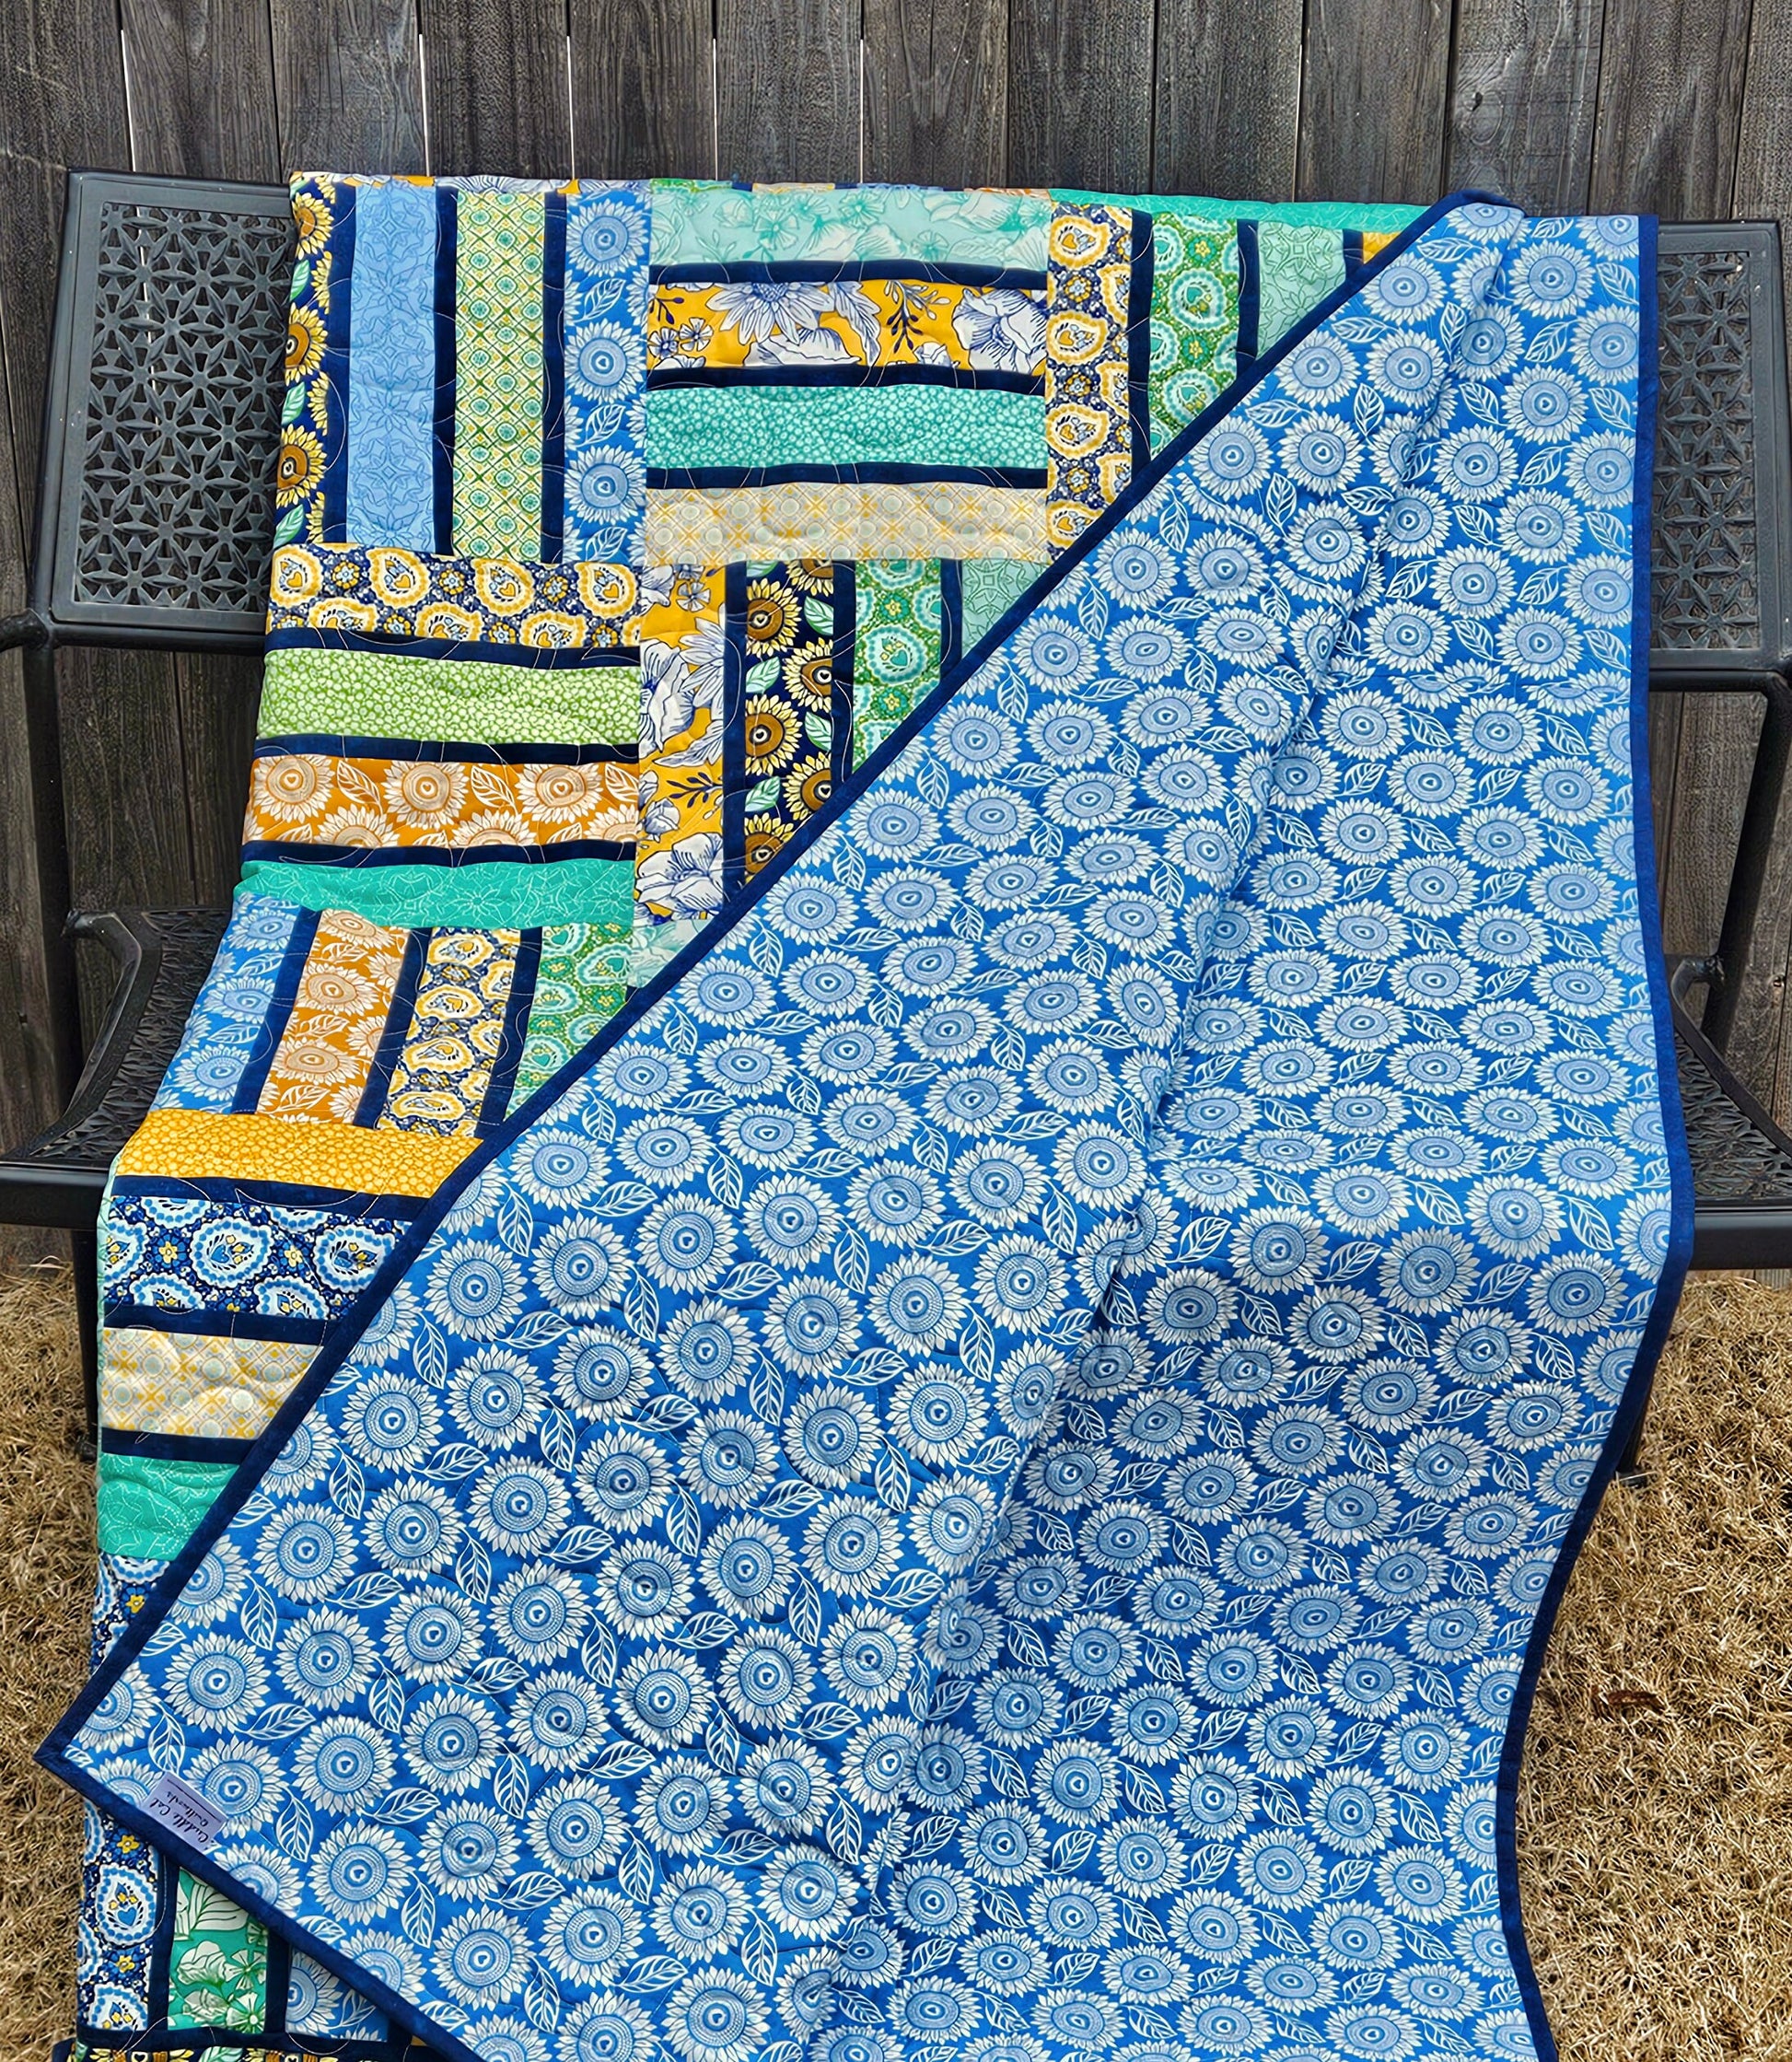 Blue Yellow and Green Sunflower Themed Throw Quilt, Handmade Quilt with Sunflower Florals and Blue Accents 63" X 72"